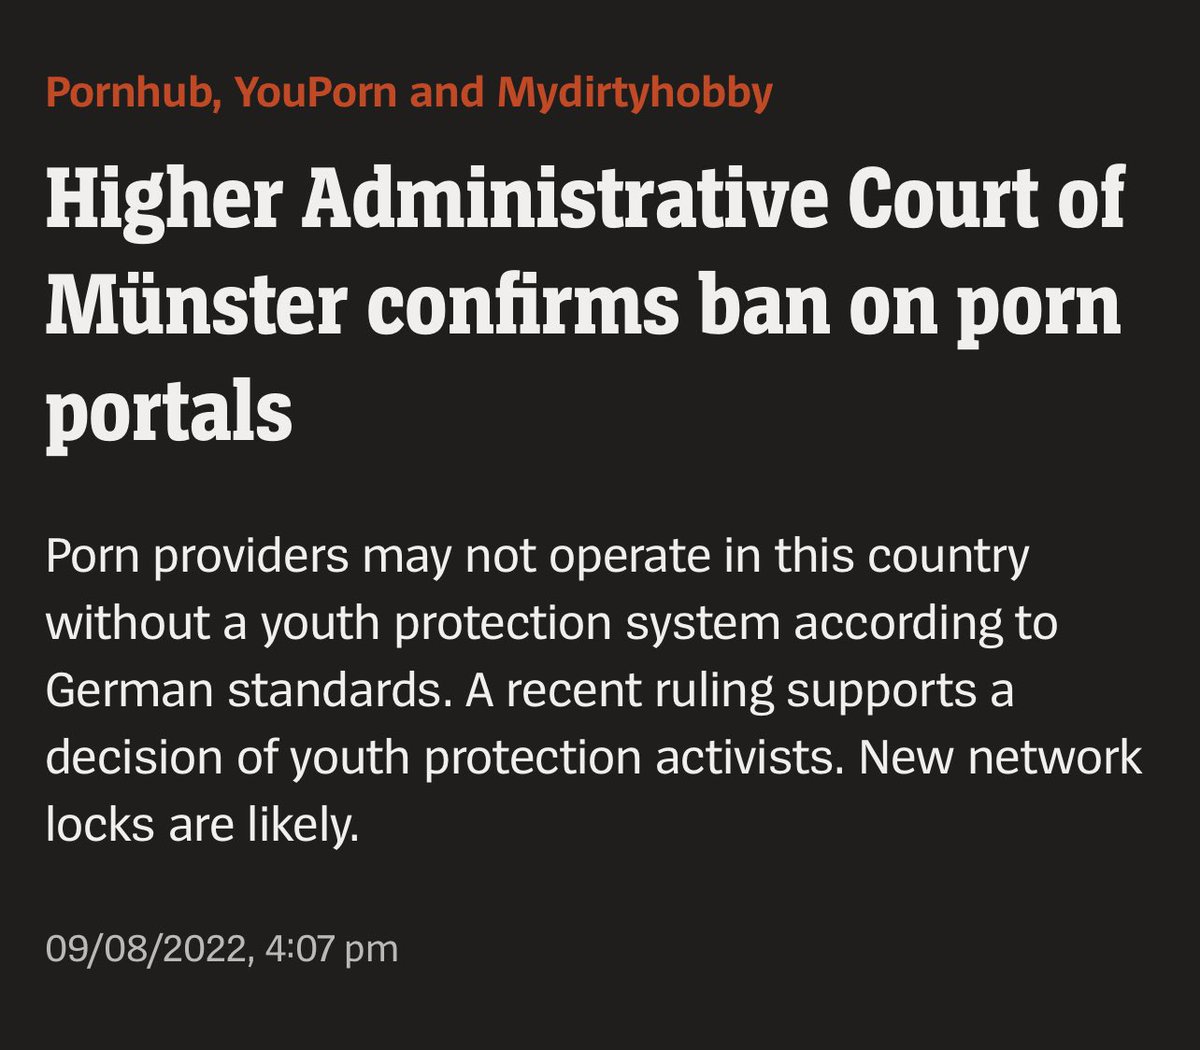 NEWS: The German government confirms they are shutting down MindGeek sites Pornhub, YouPorn and Mydirtyhobby for failure to protect children unless they implement reliable age verification. MindGeek’s widespread abuse of children is finally coming to an end.  #Traffickinghub 